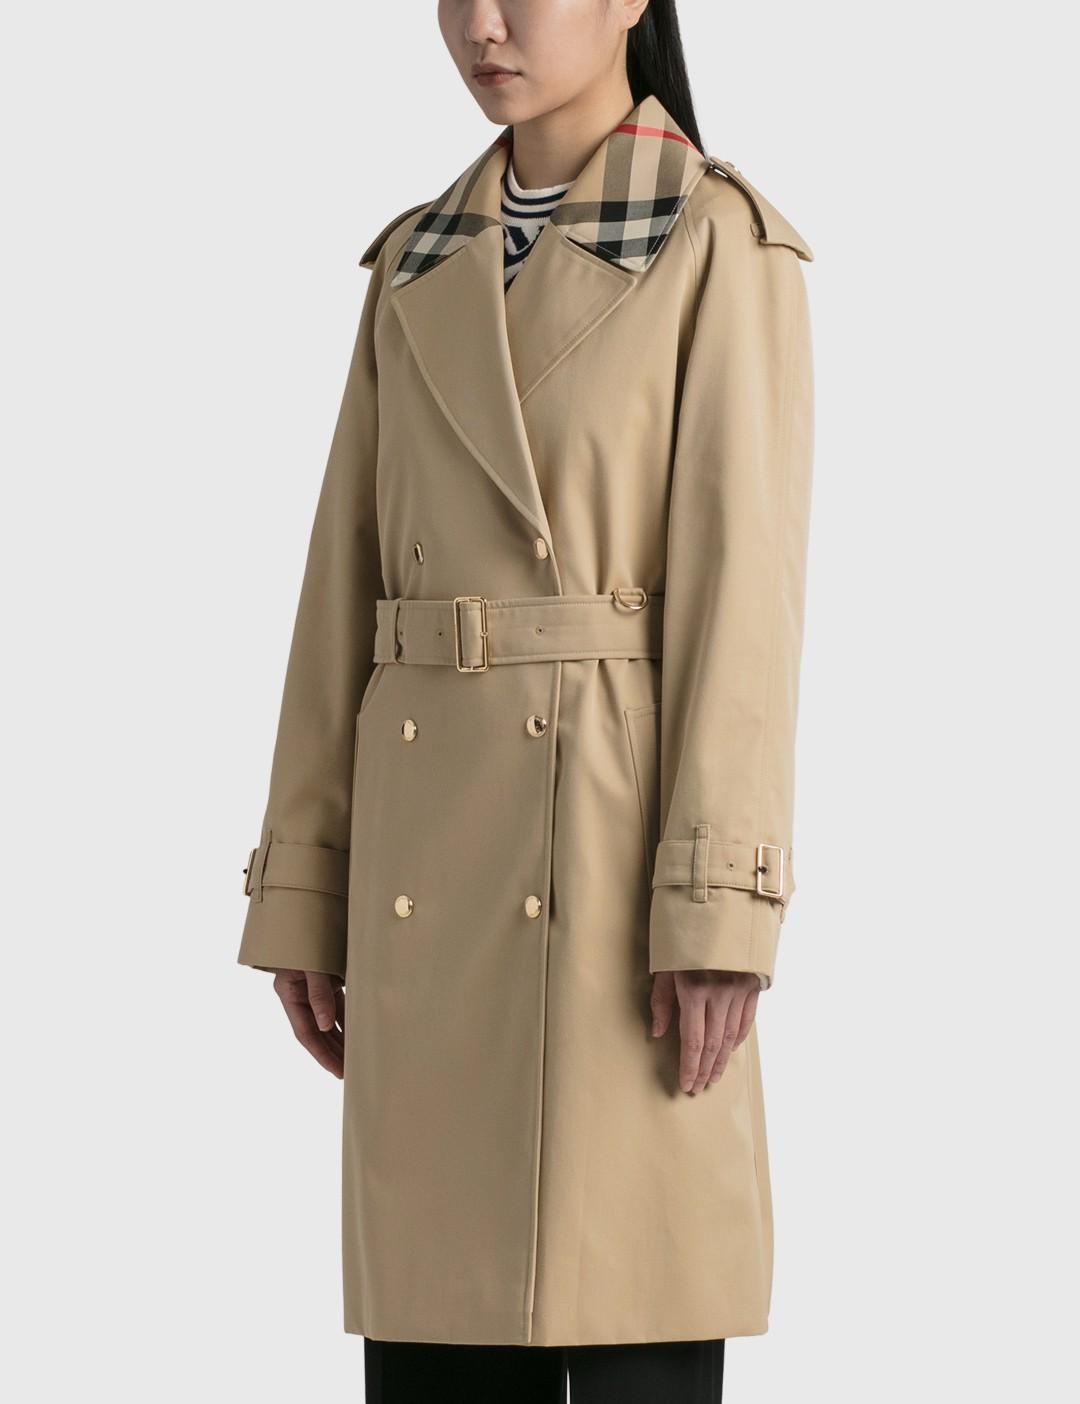 Burberry Check Trim Cotton Gabardine Waterloo Trench Coat in Natural | Lyst